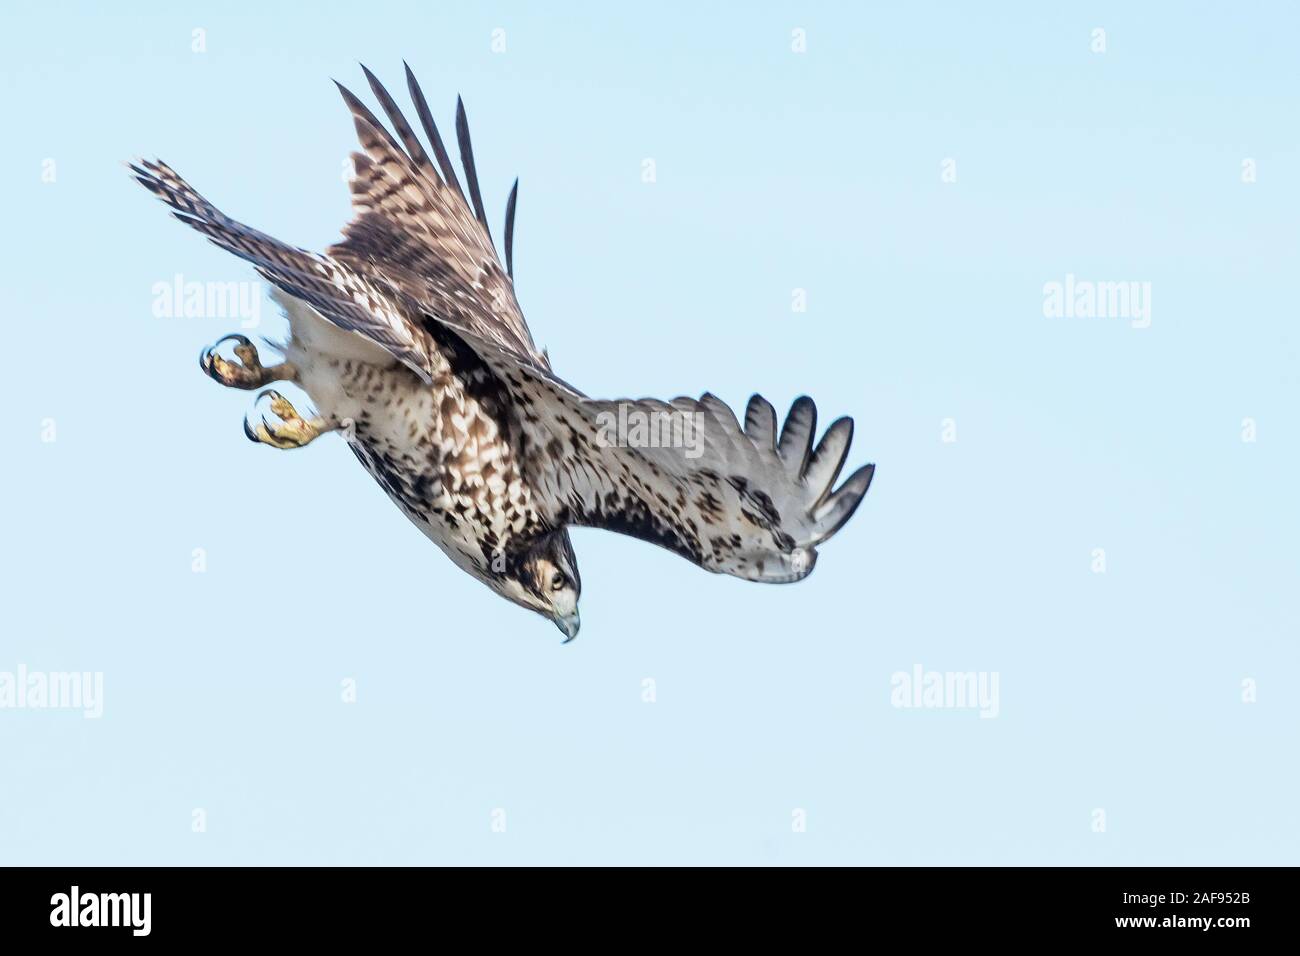 Juvenile red-tailed hawk in dive Stock Photo